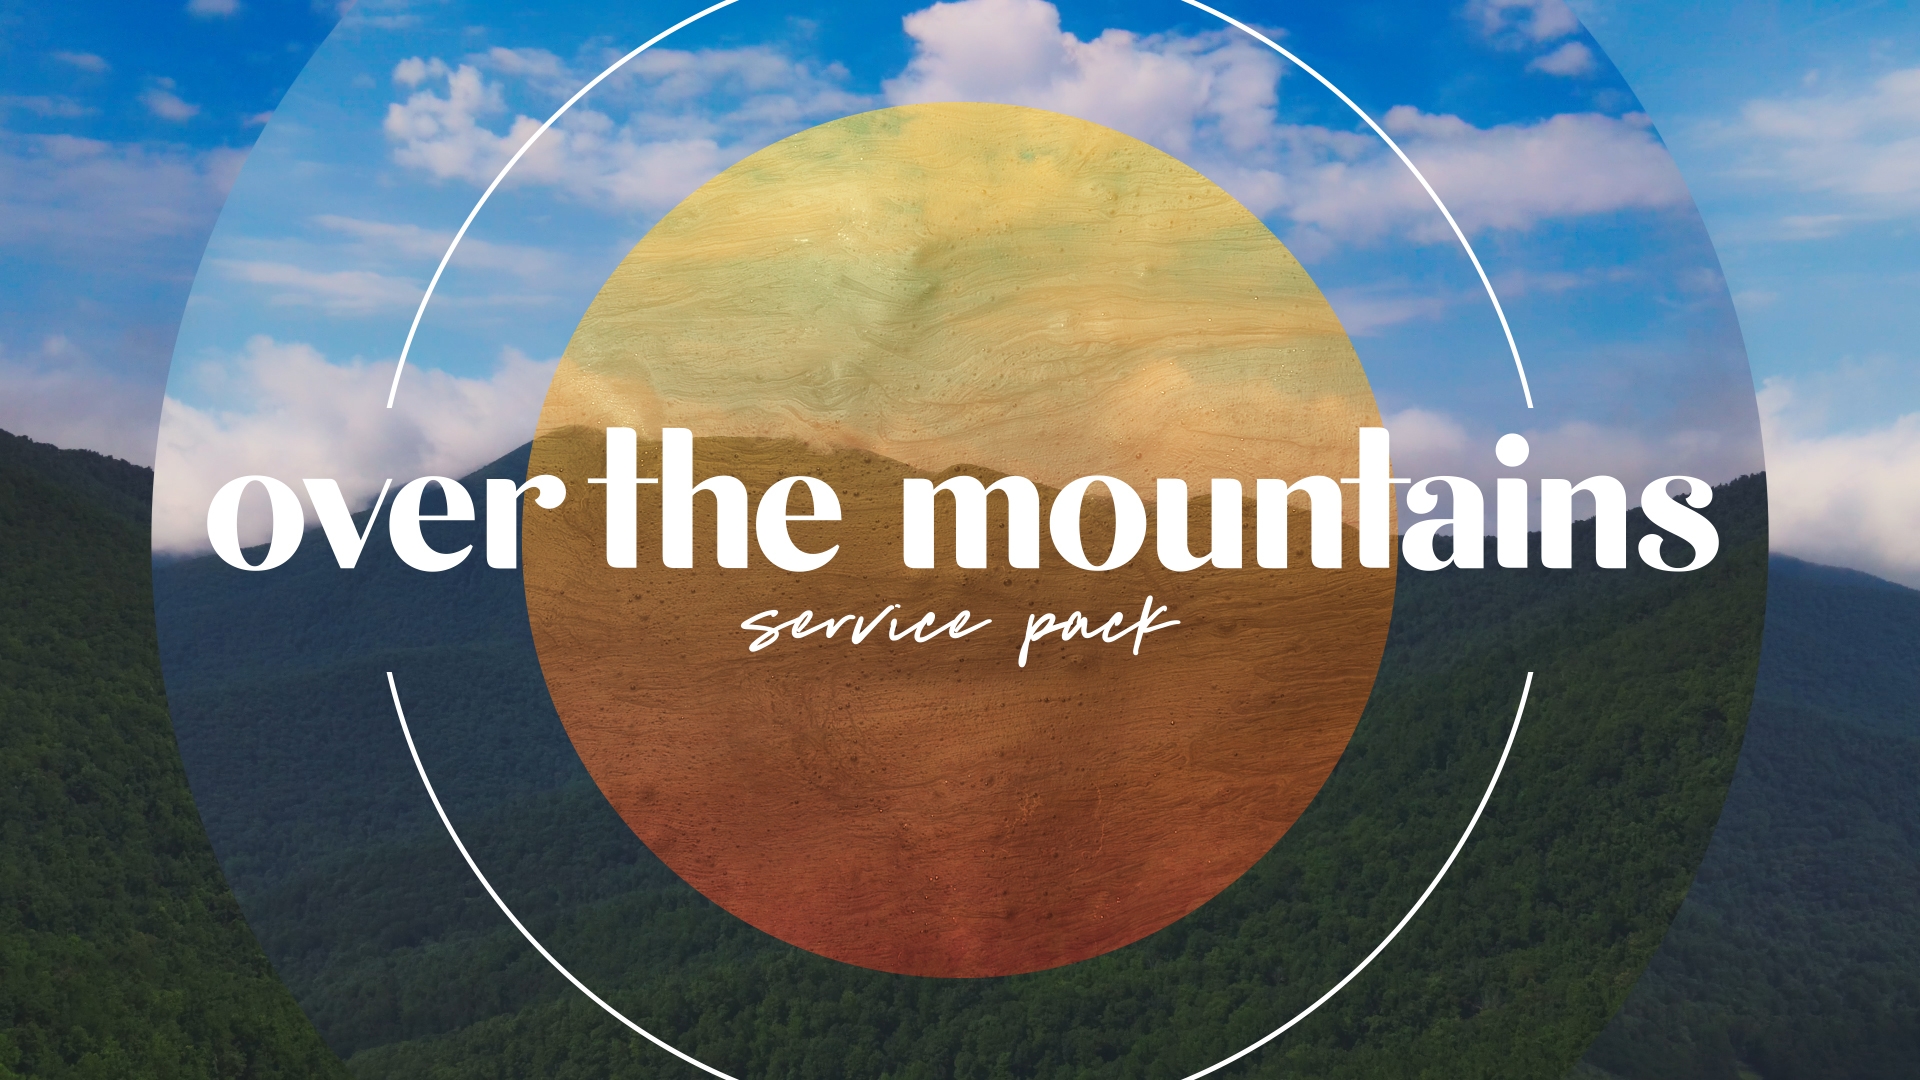 Over The Mountains Service Pack